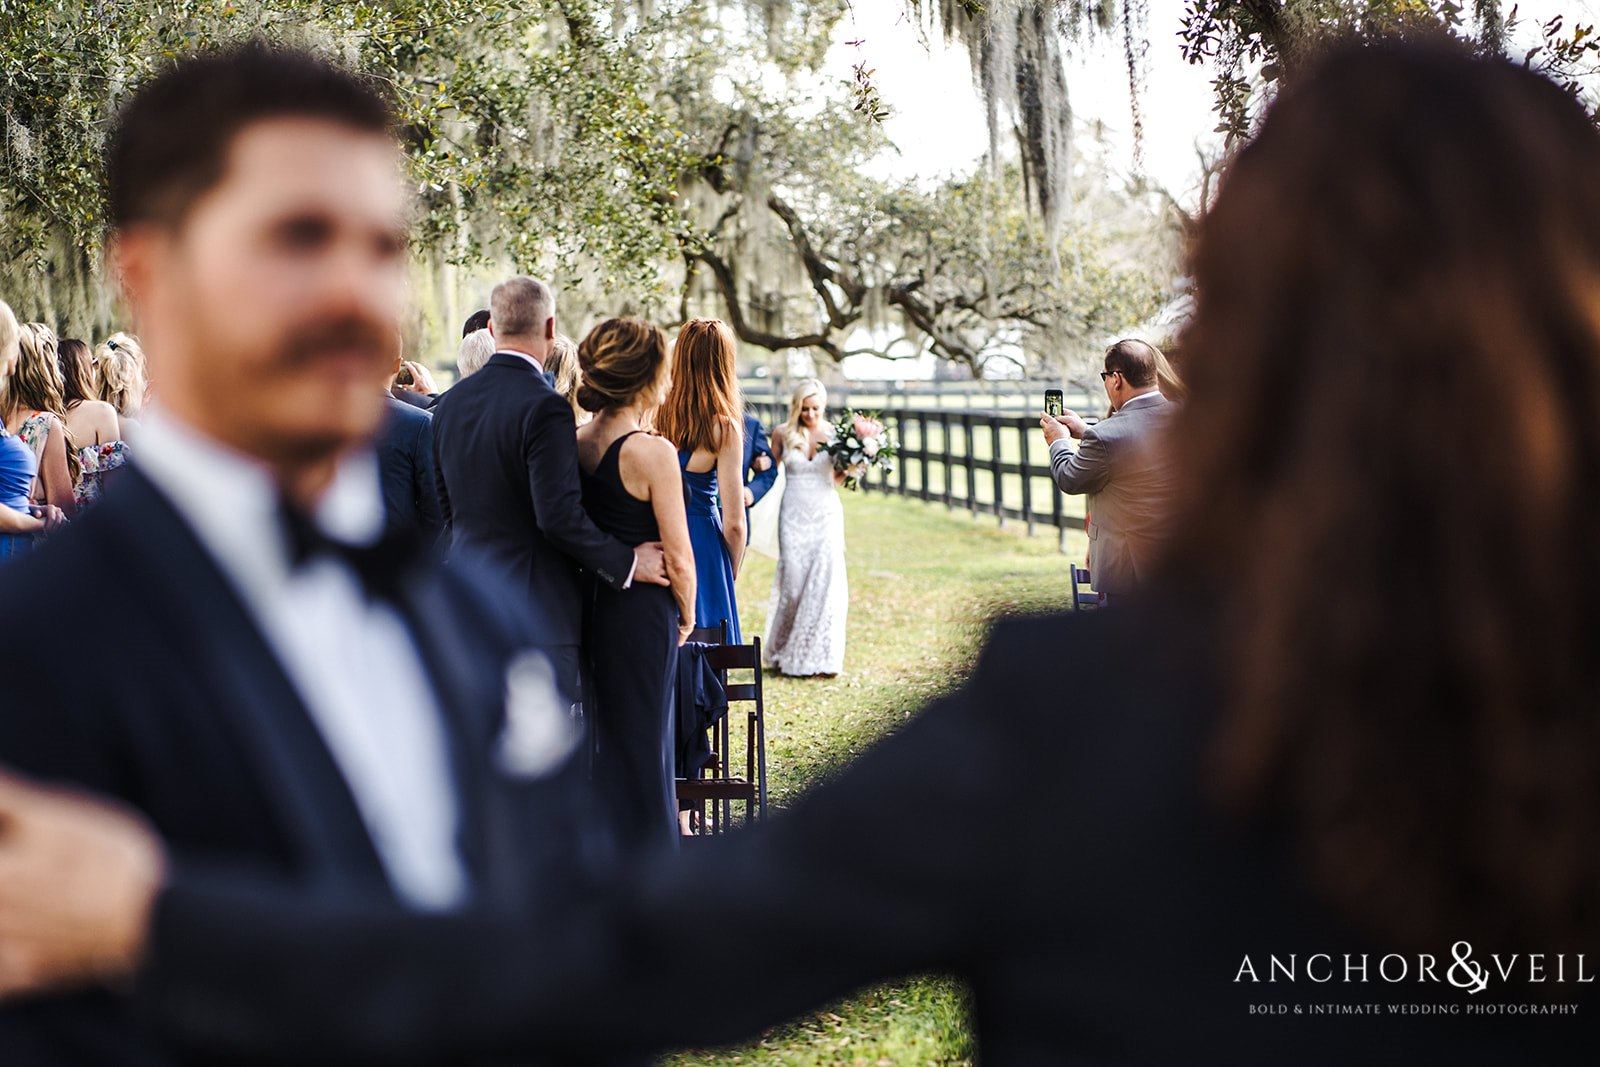 "Here comes the bride" at the Boone Hall Plantation Wedding! 